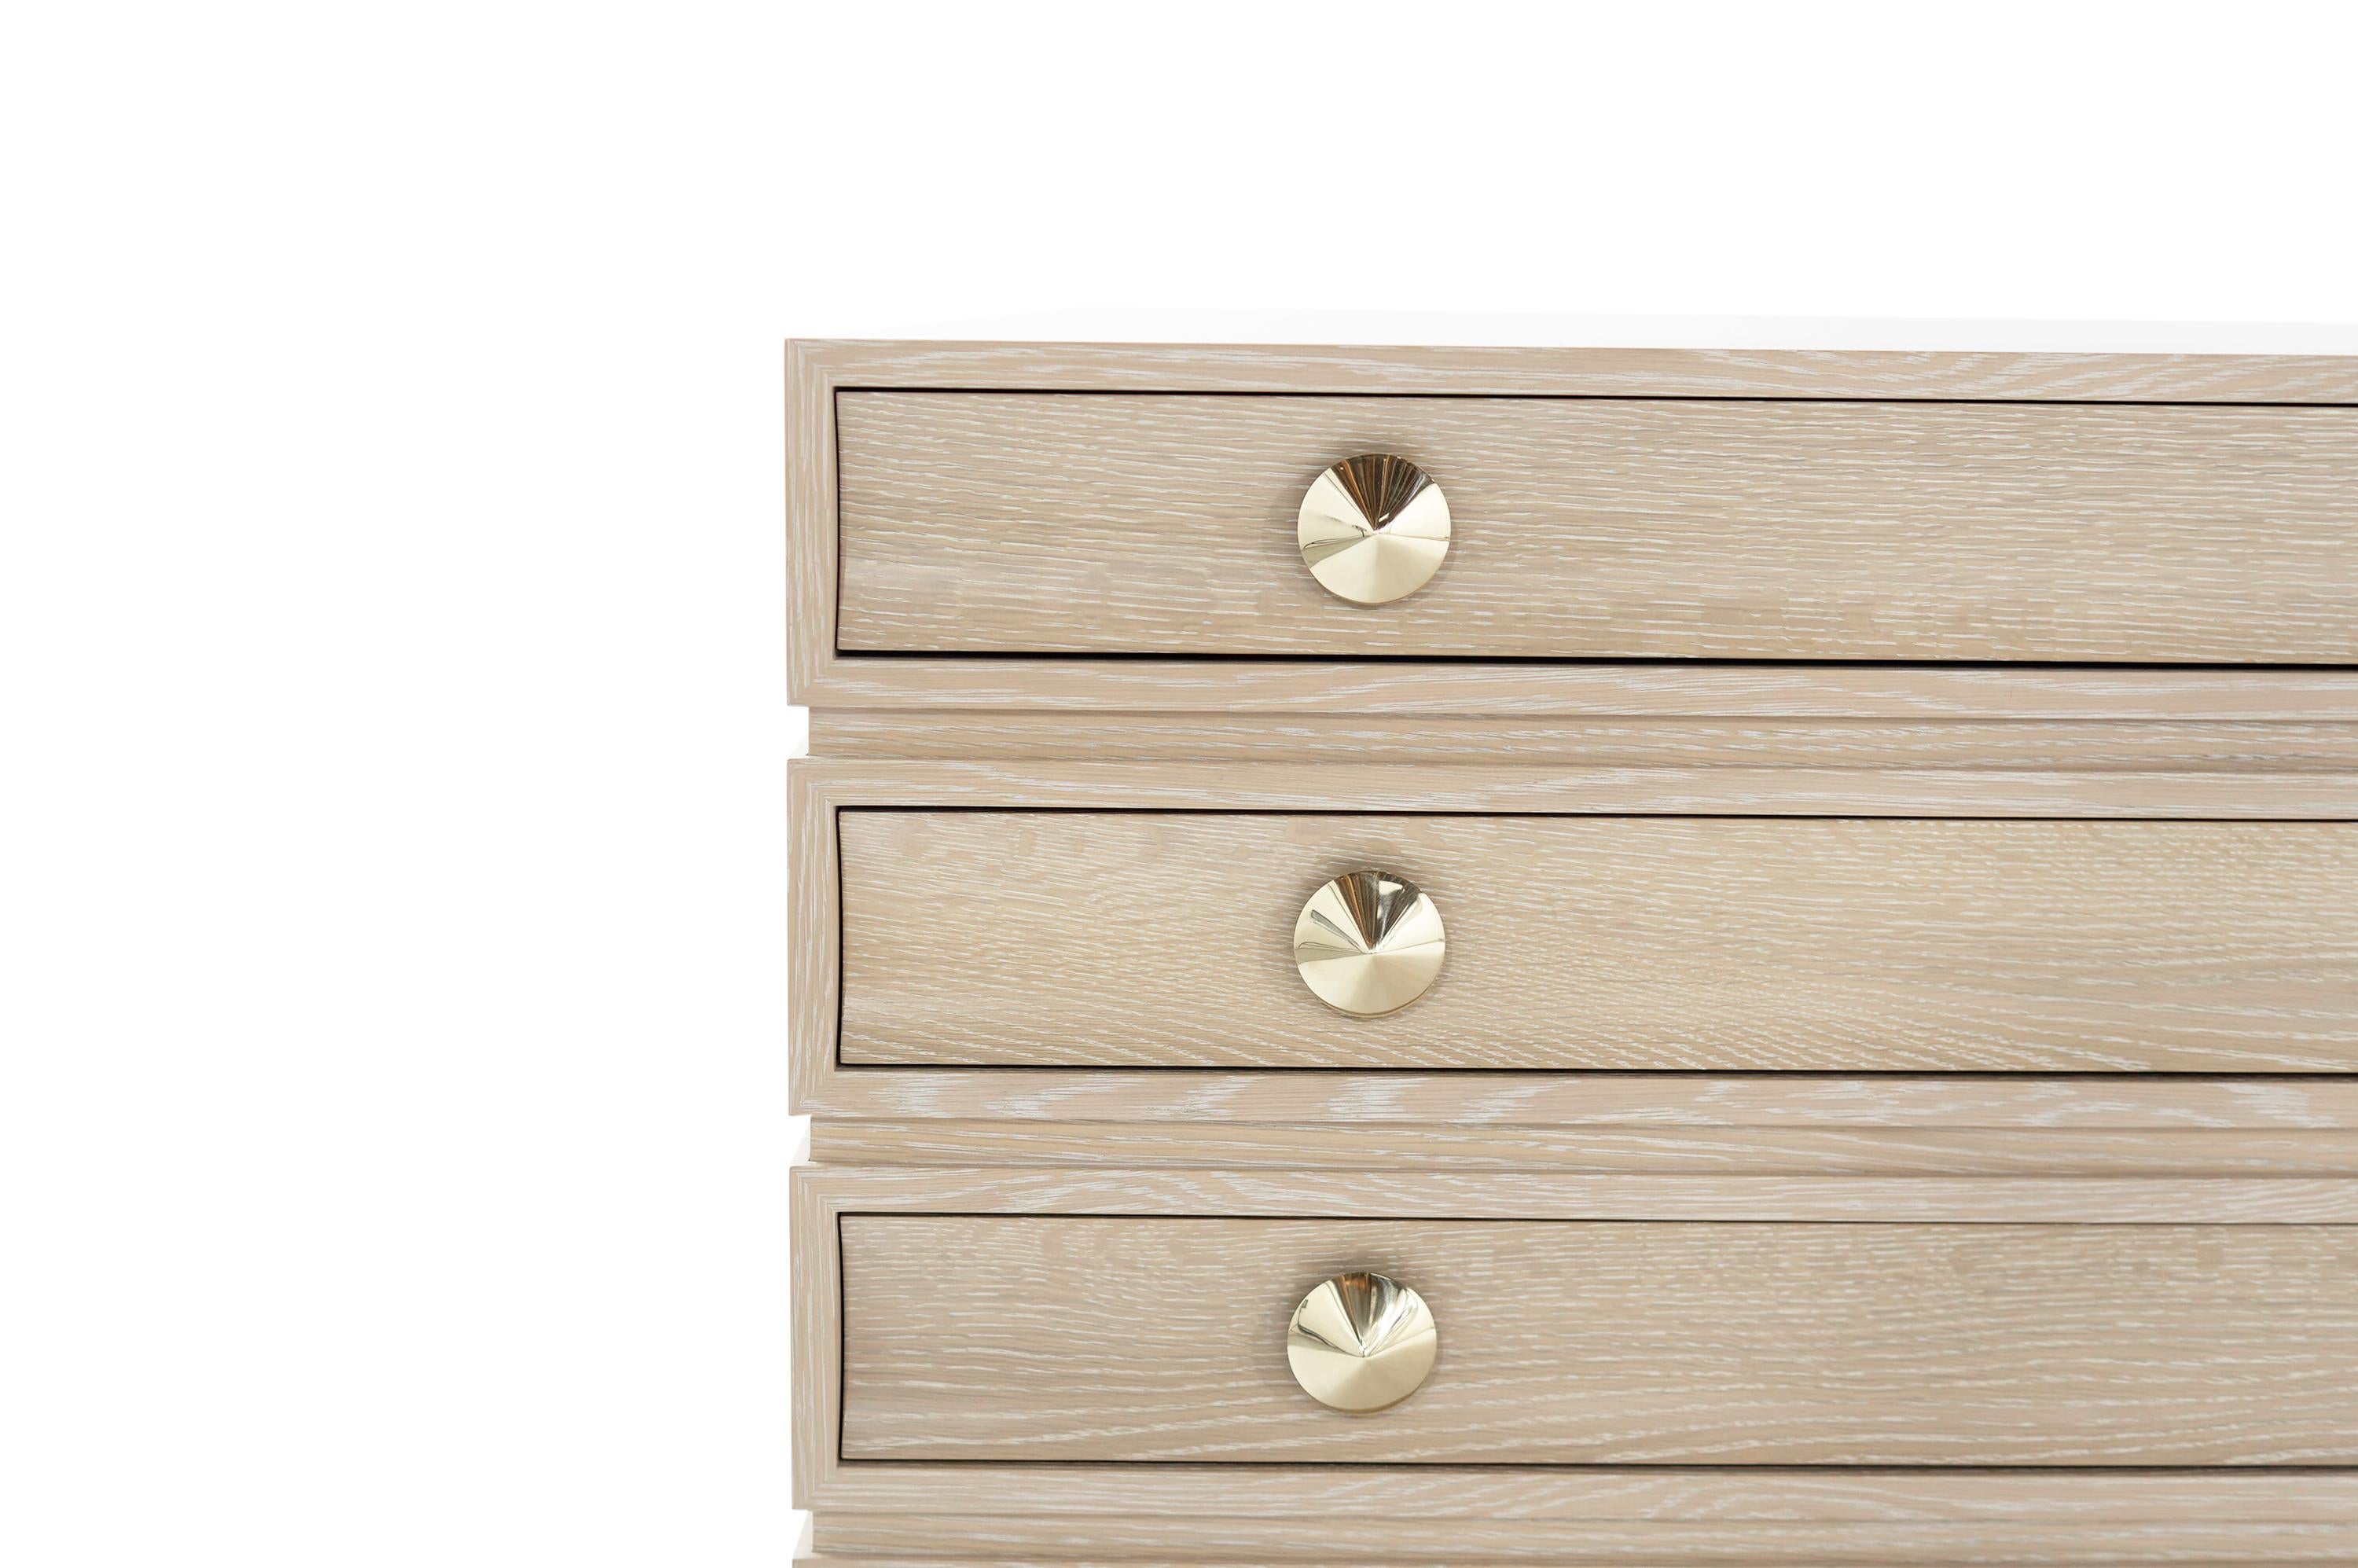 Stacked Dressers in Limed Oak In New Condition For Sale In Westport, CT